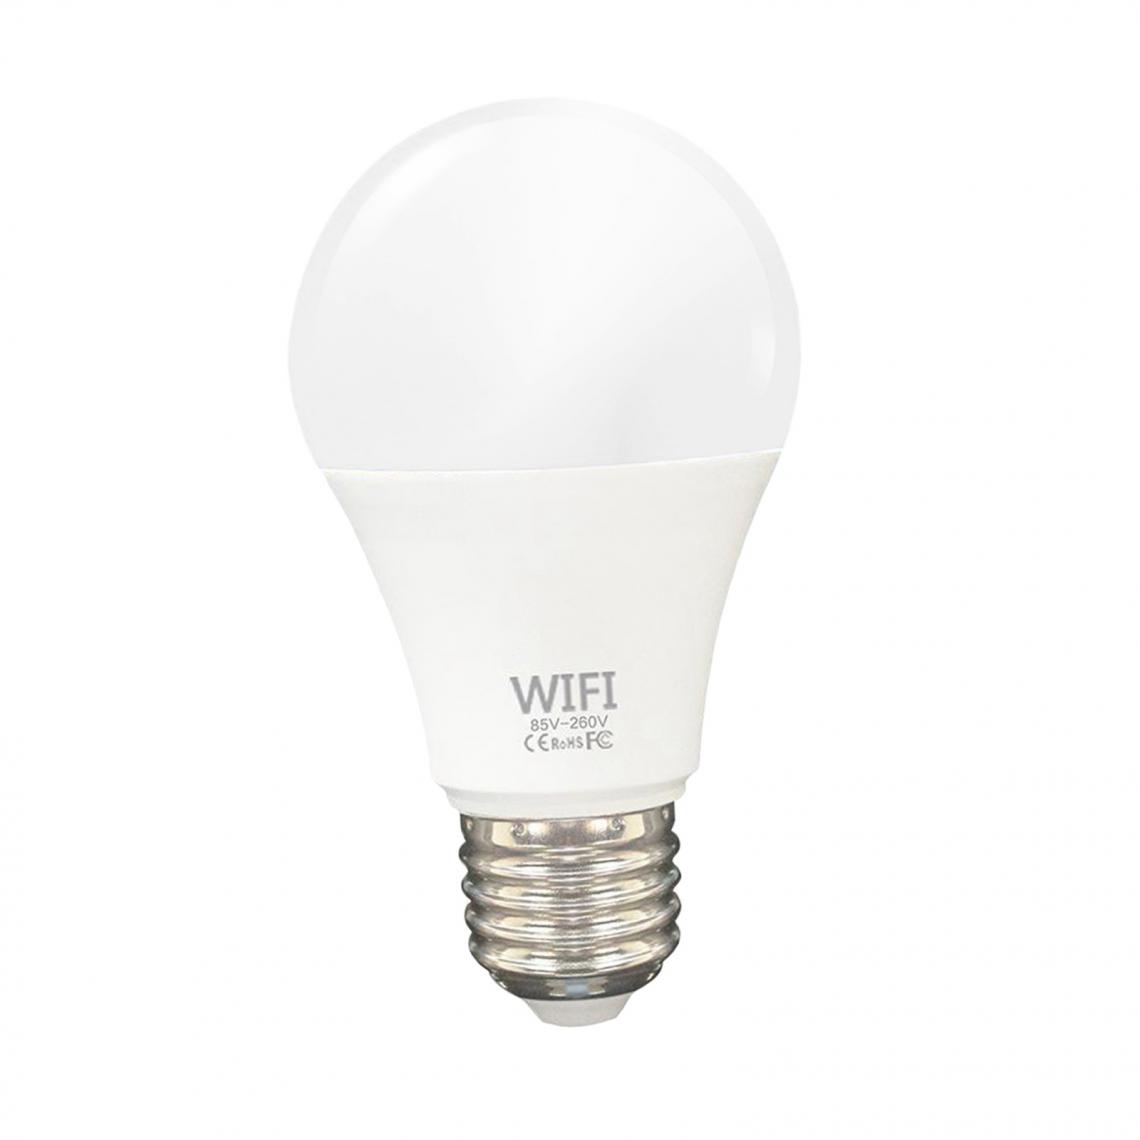 NC - Ampoules Intelligentes WiFi Dimmable LED E27 Control / Google Home / Alexa 12W 1000LM - Ampoules LED